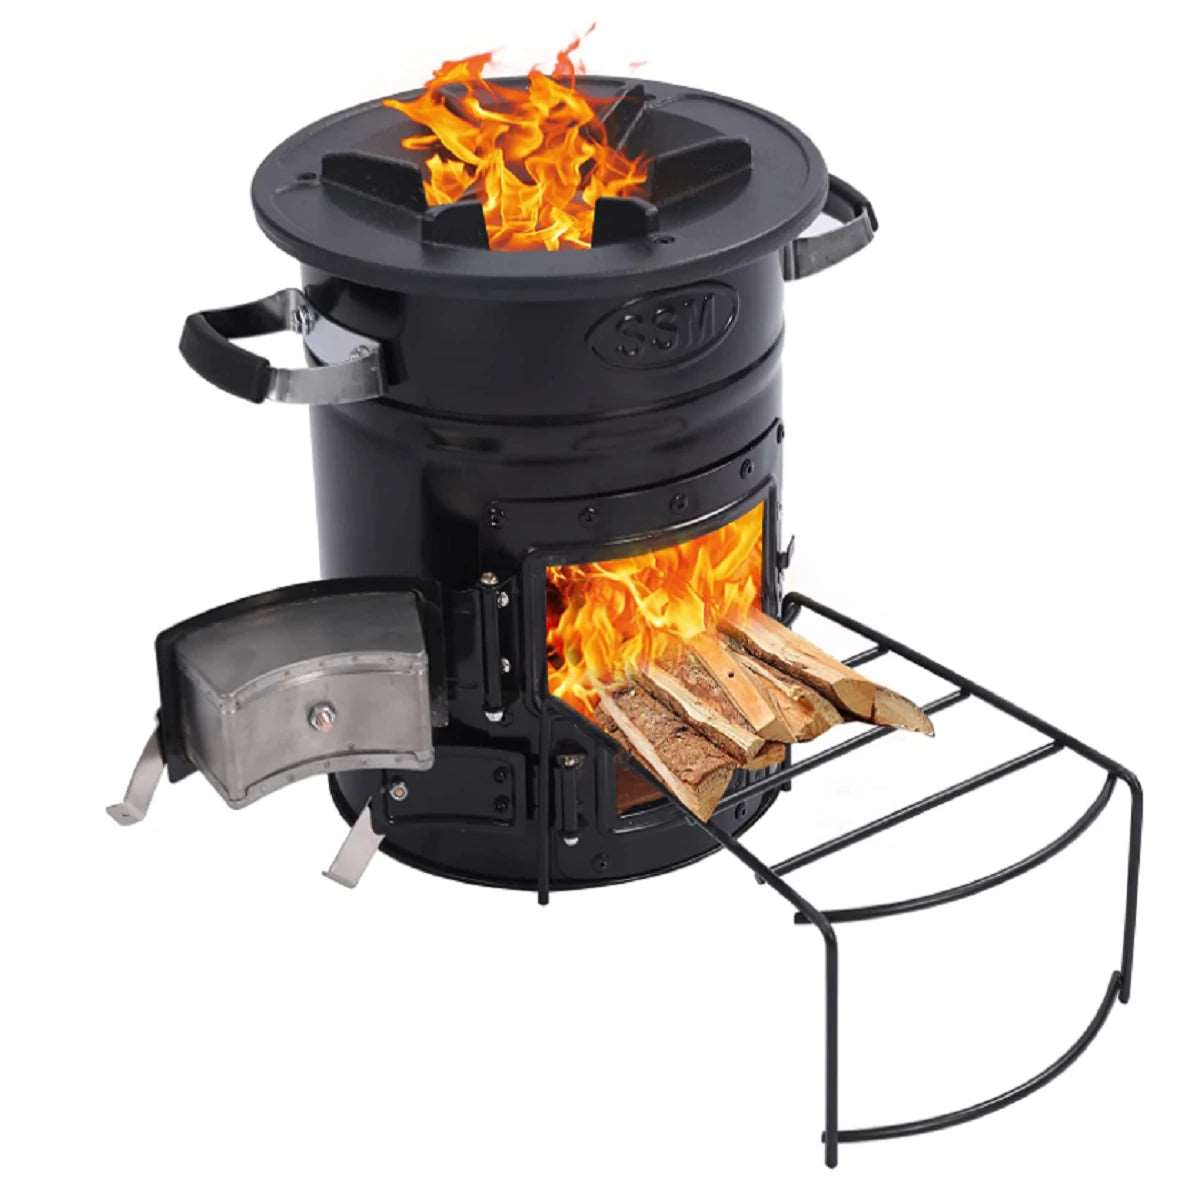 Rocket Stove ,Portable Wood Stove For Camping with Handle and Carry Bag